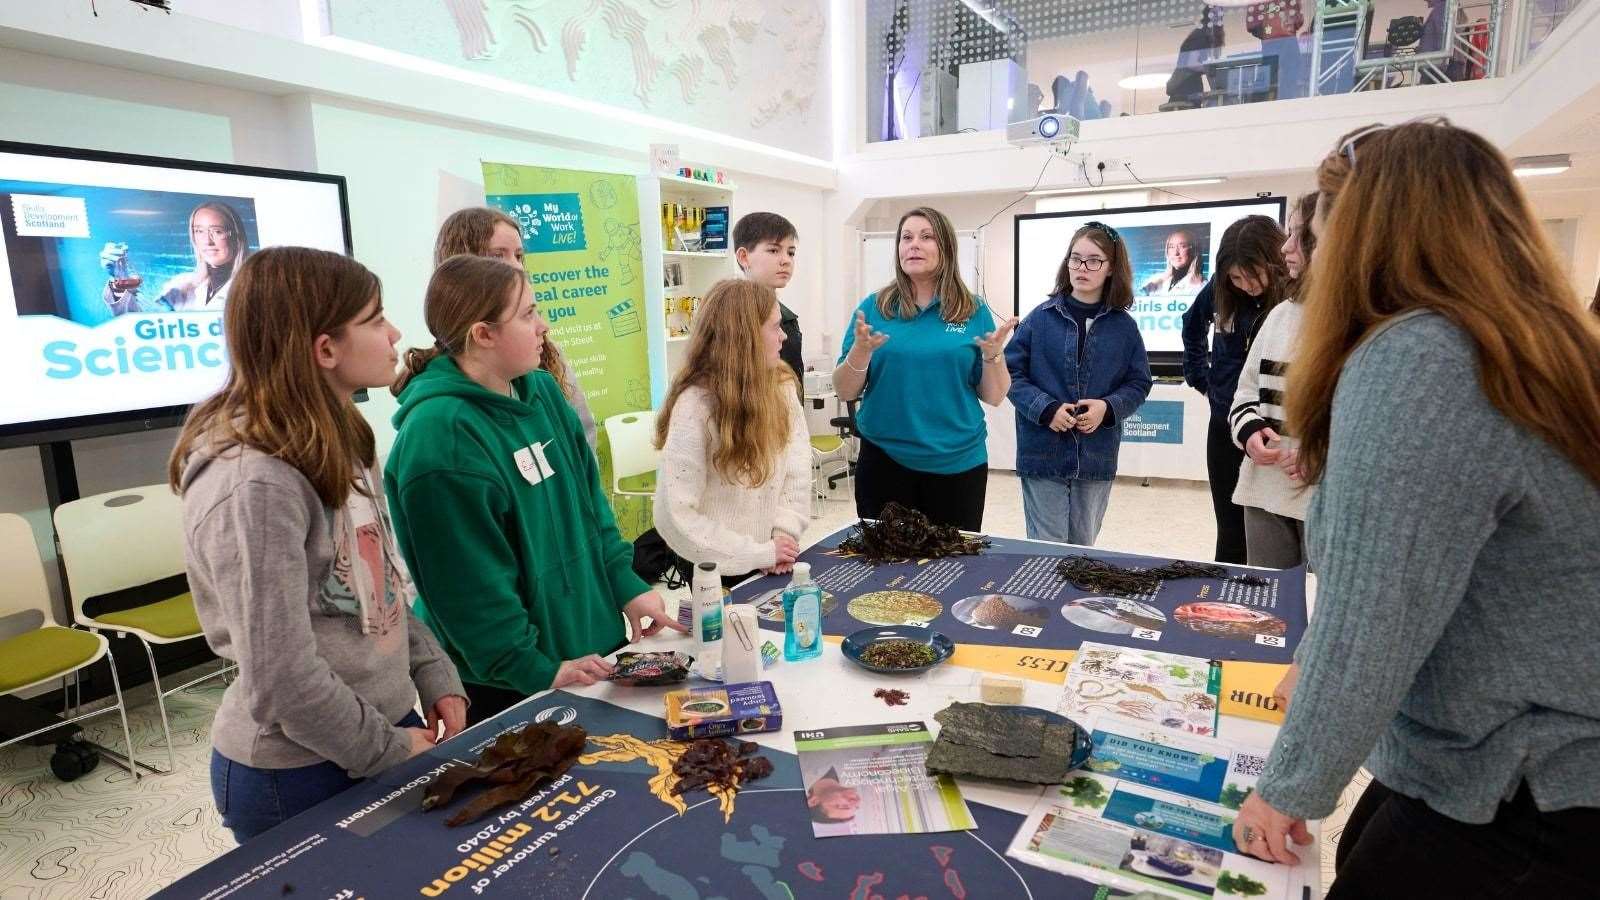 A Girls do Science event is being held in Inverness.